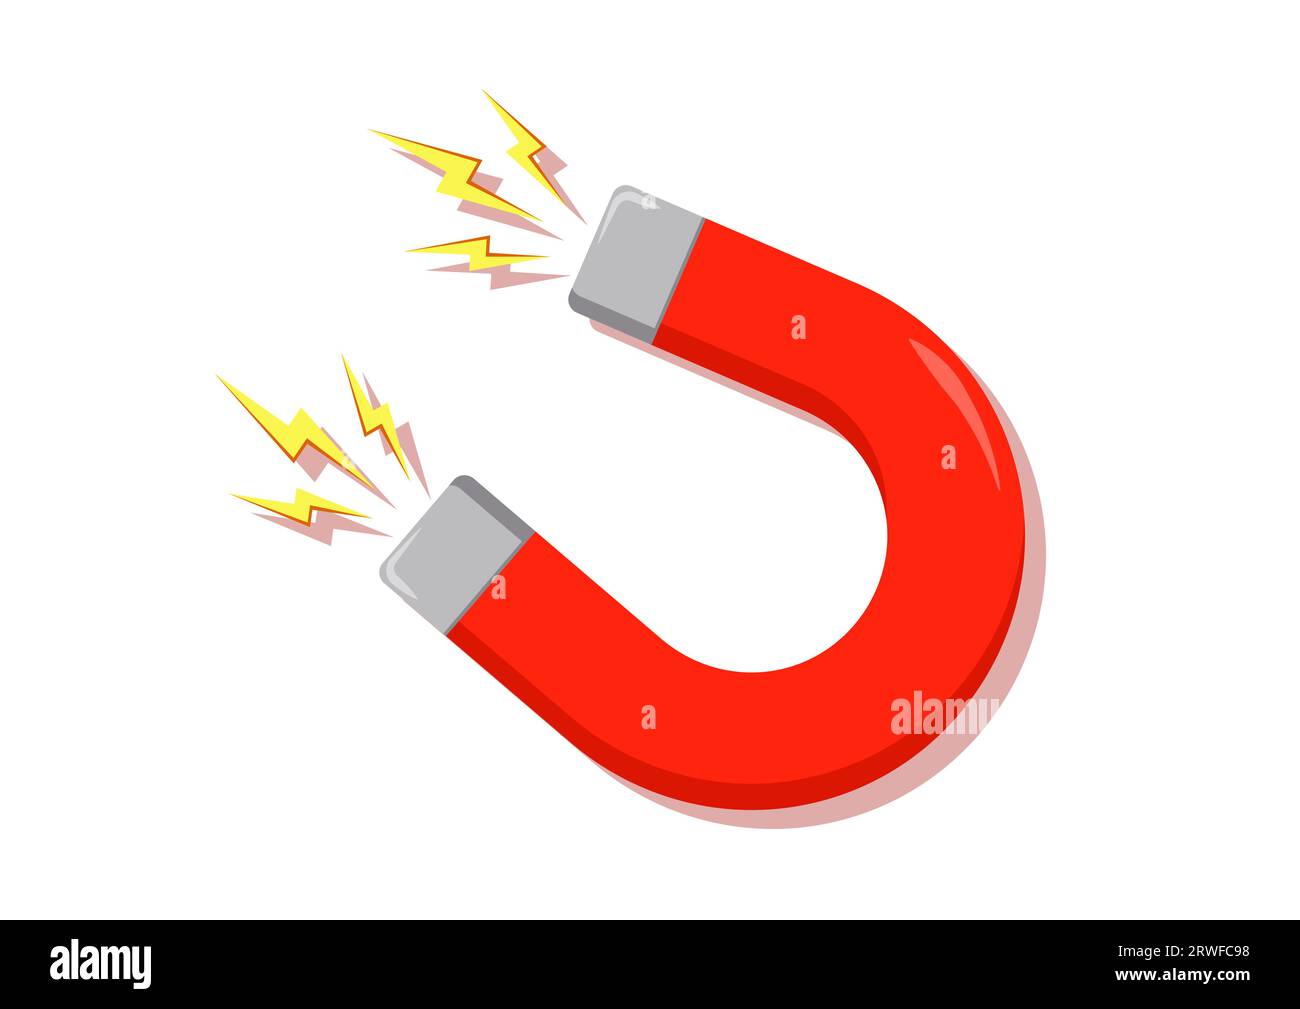 Magnet With Two Poles Cartoon Vector Flat Design Stock Vector